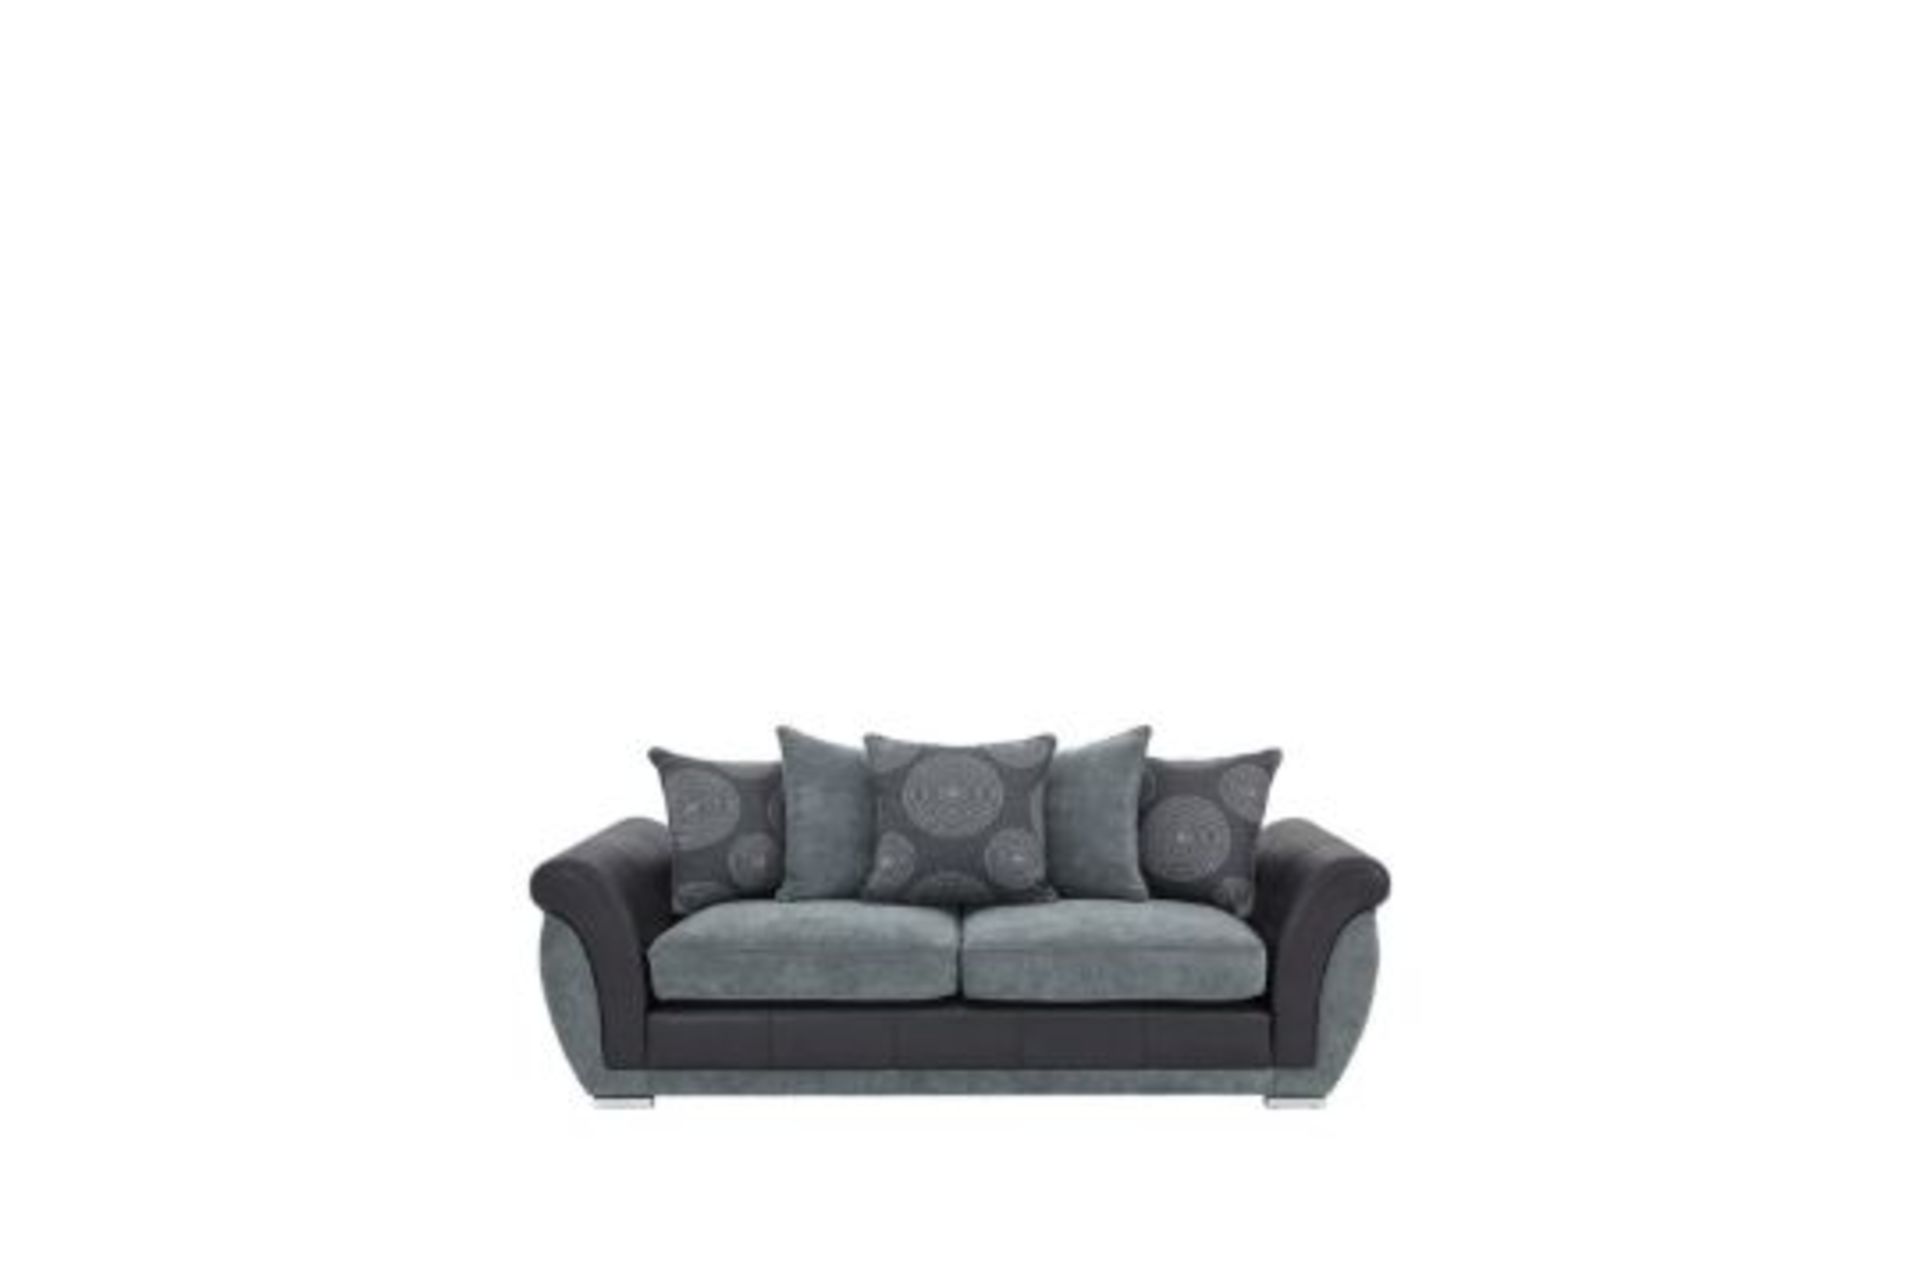 Danube 3 Seater Sofa. BLACK/GREY RPP £649.00. 90 x 219 x 94 cm, Fashionable Soft woven upholstery - Image 2 of 3